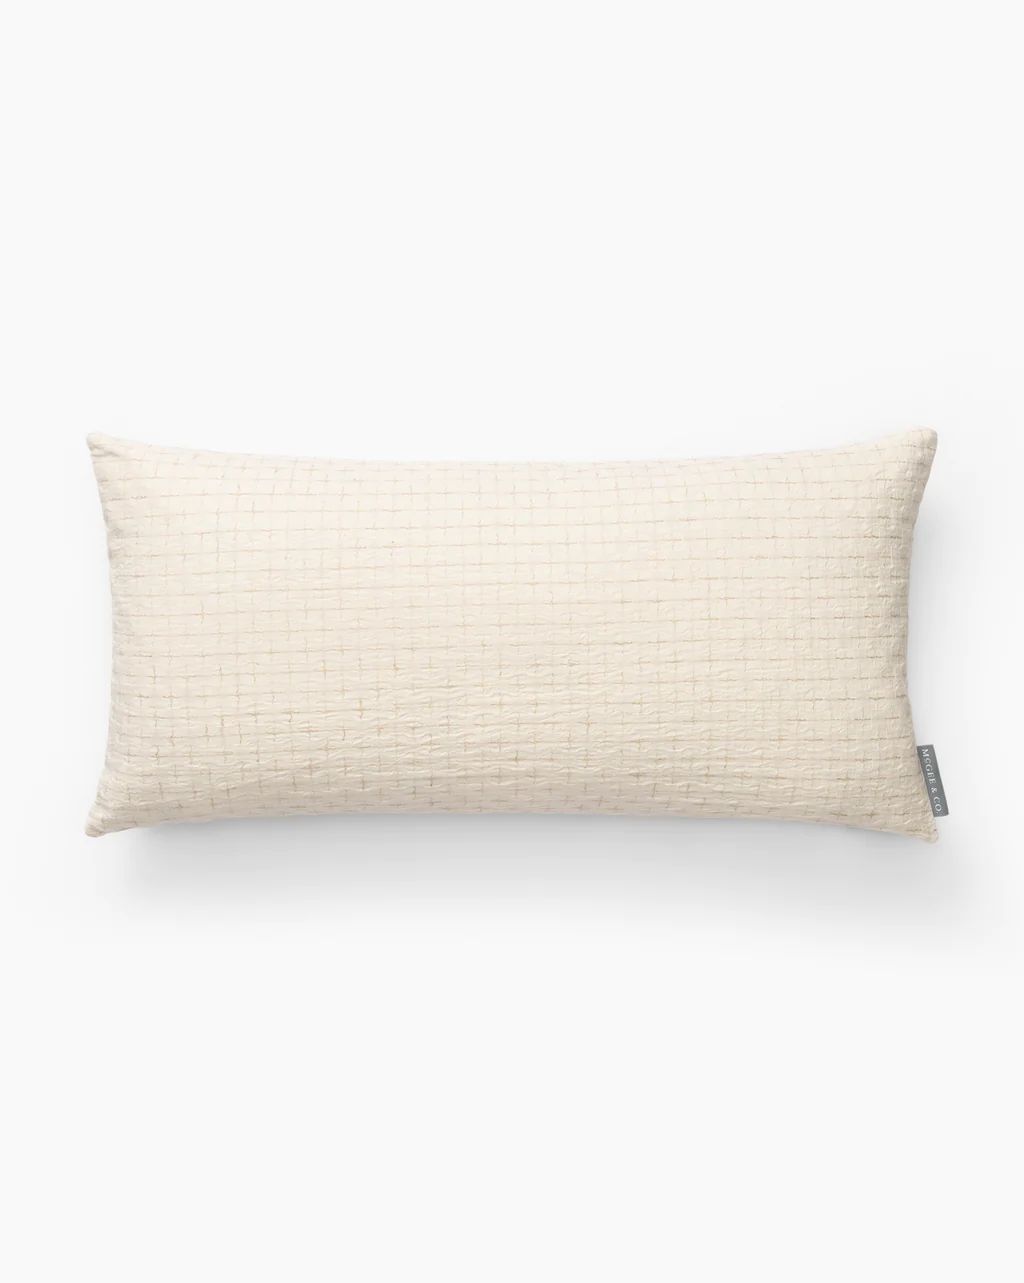 Vintage Cream Quilted Pillow Cover | McGee & Co.